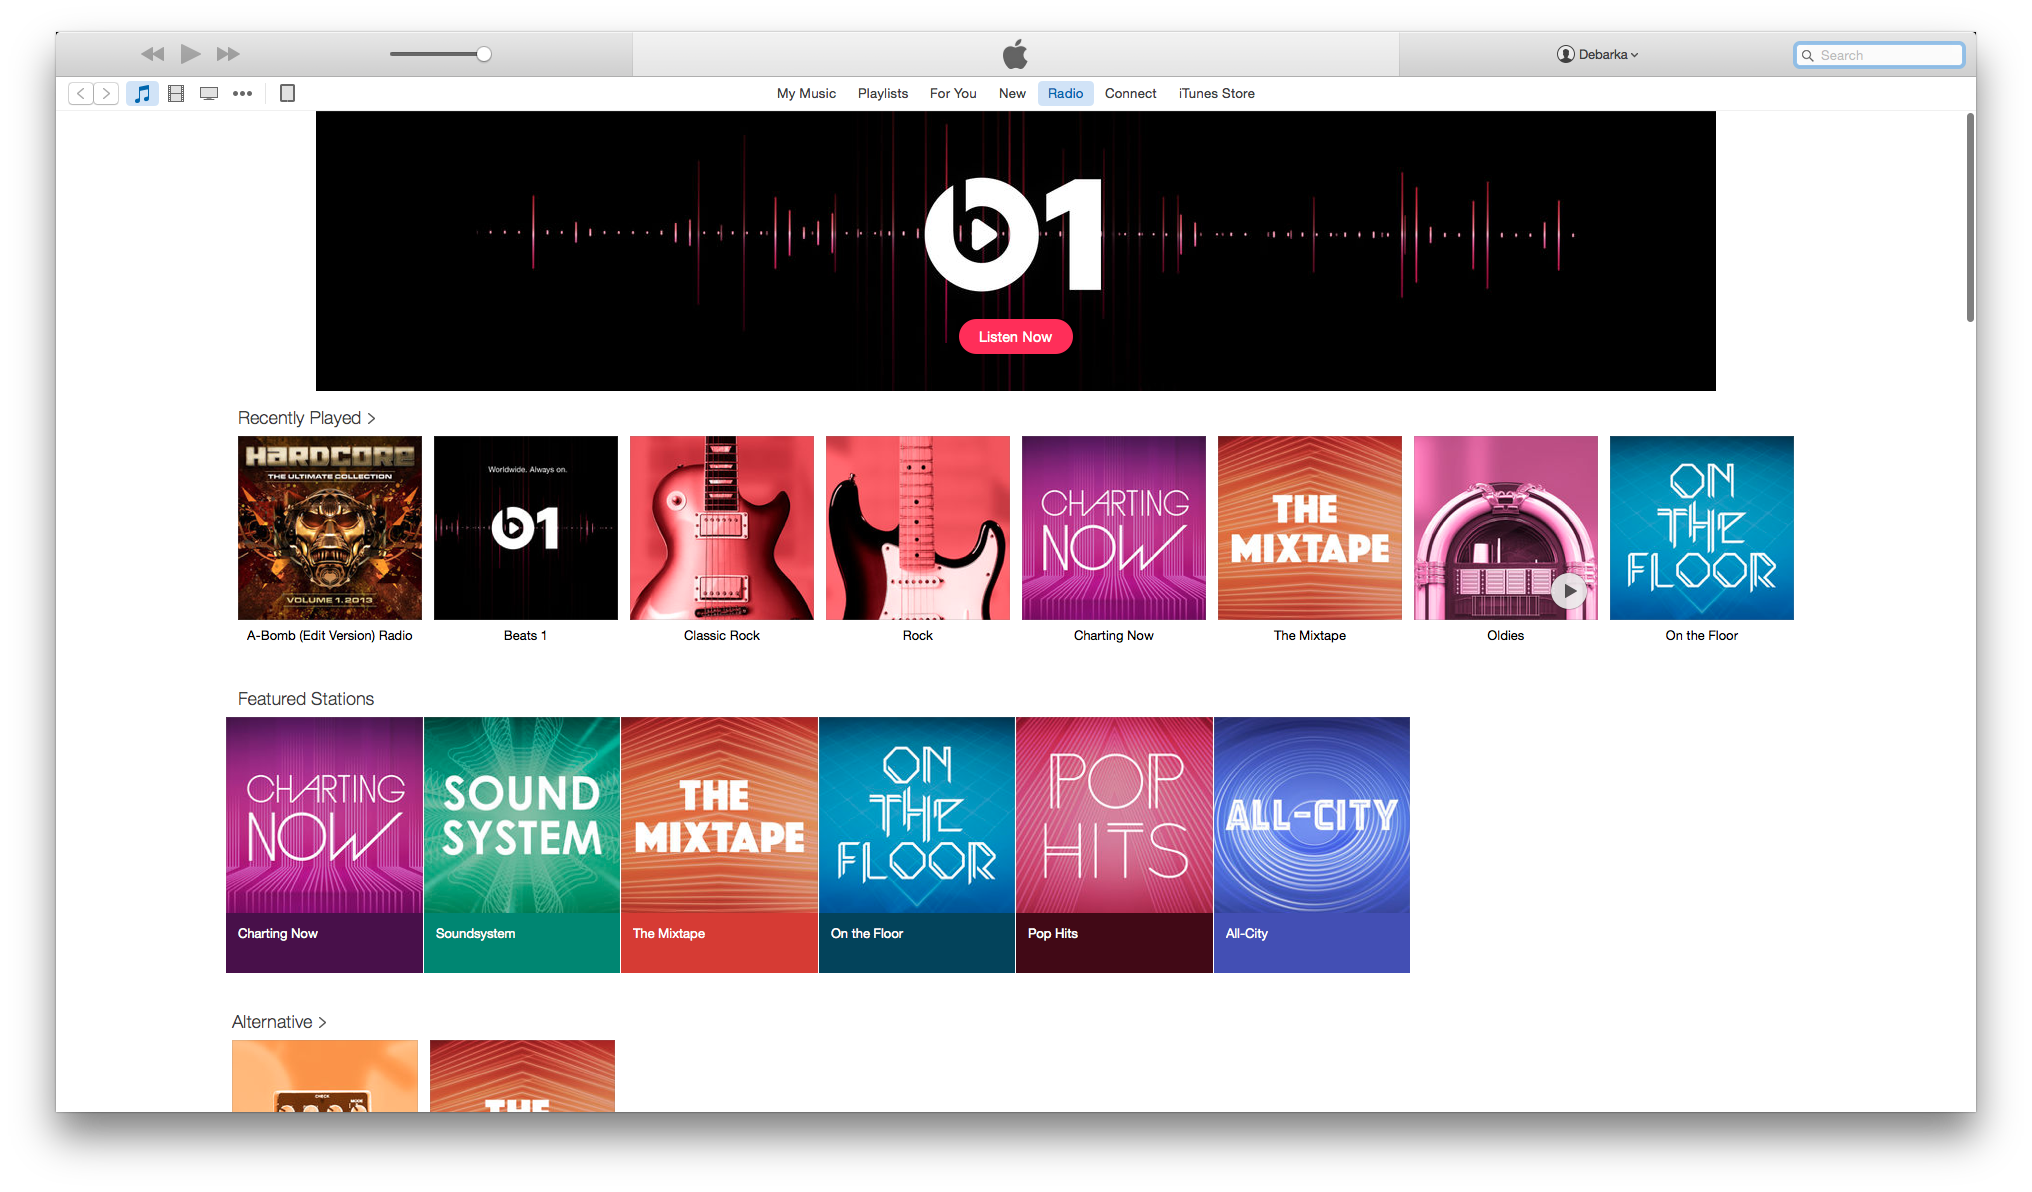 The Radio tab on iTunes showing Beats 1 Radio and other automated playlists based on genre